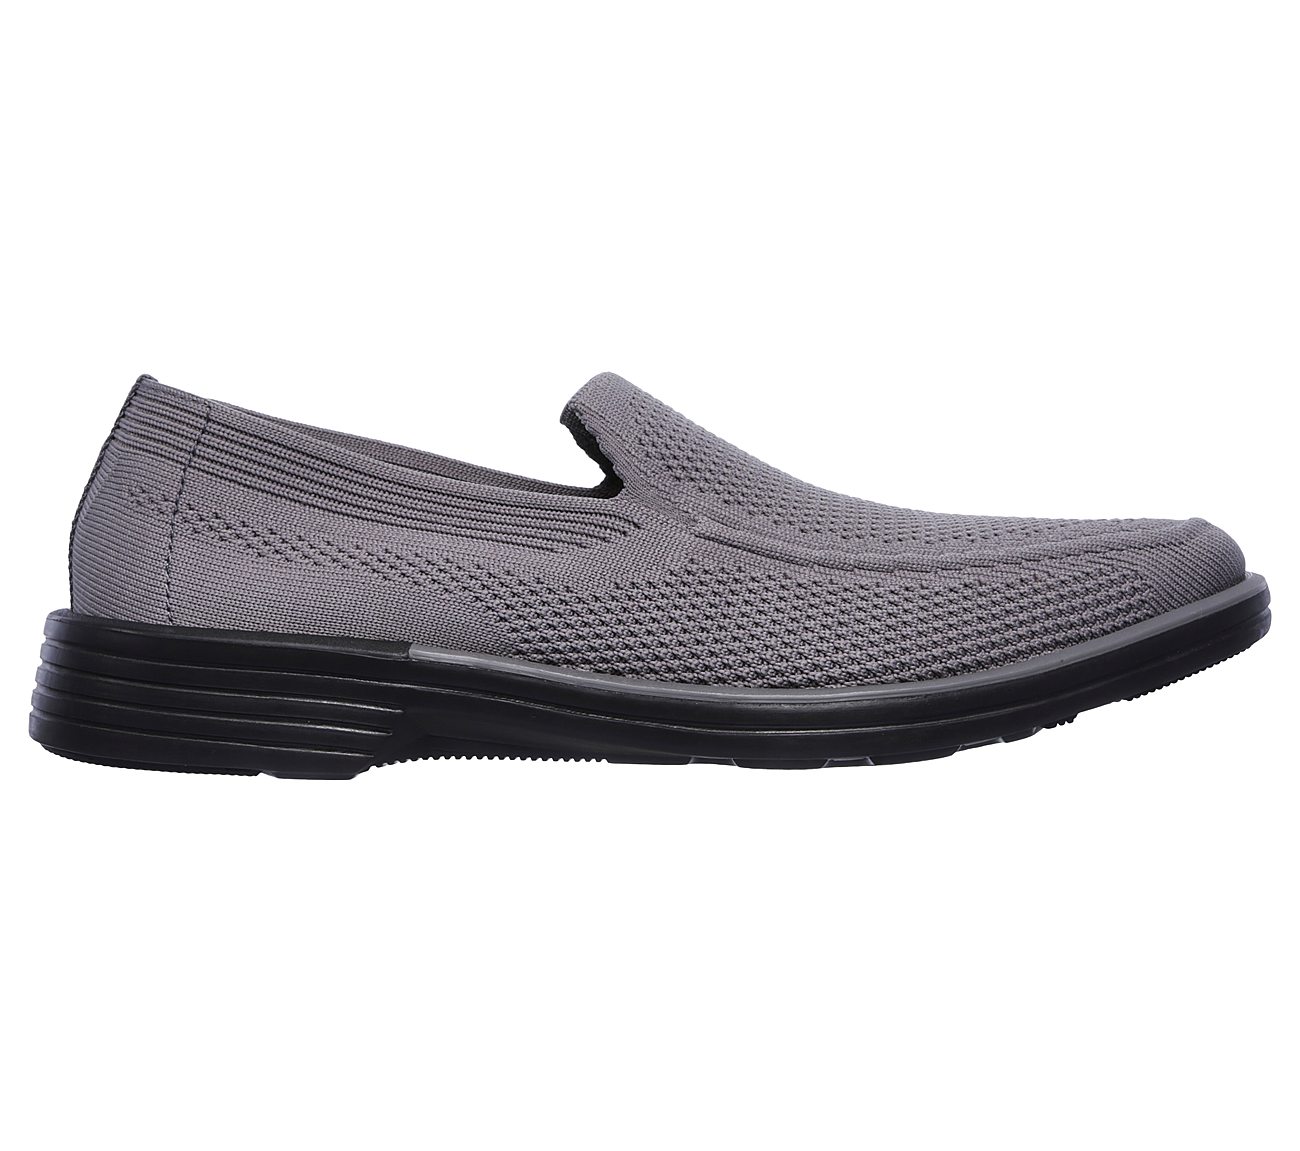 Buy SKECHERS Relaxed Fit: Walson - Morado Relaxed Fit Shoes only $80.00